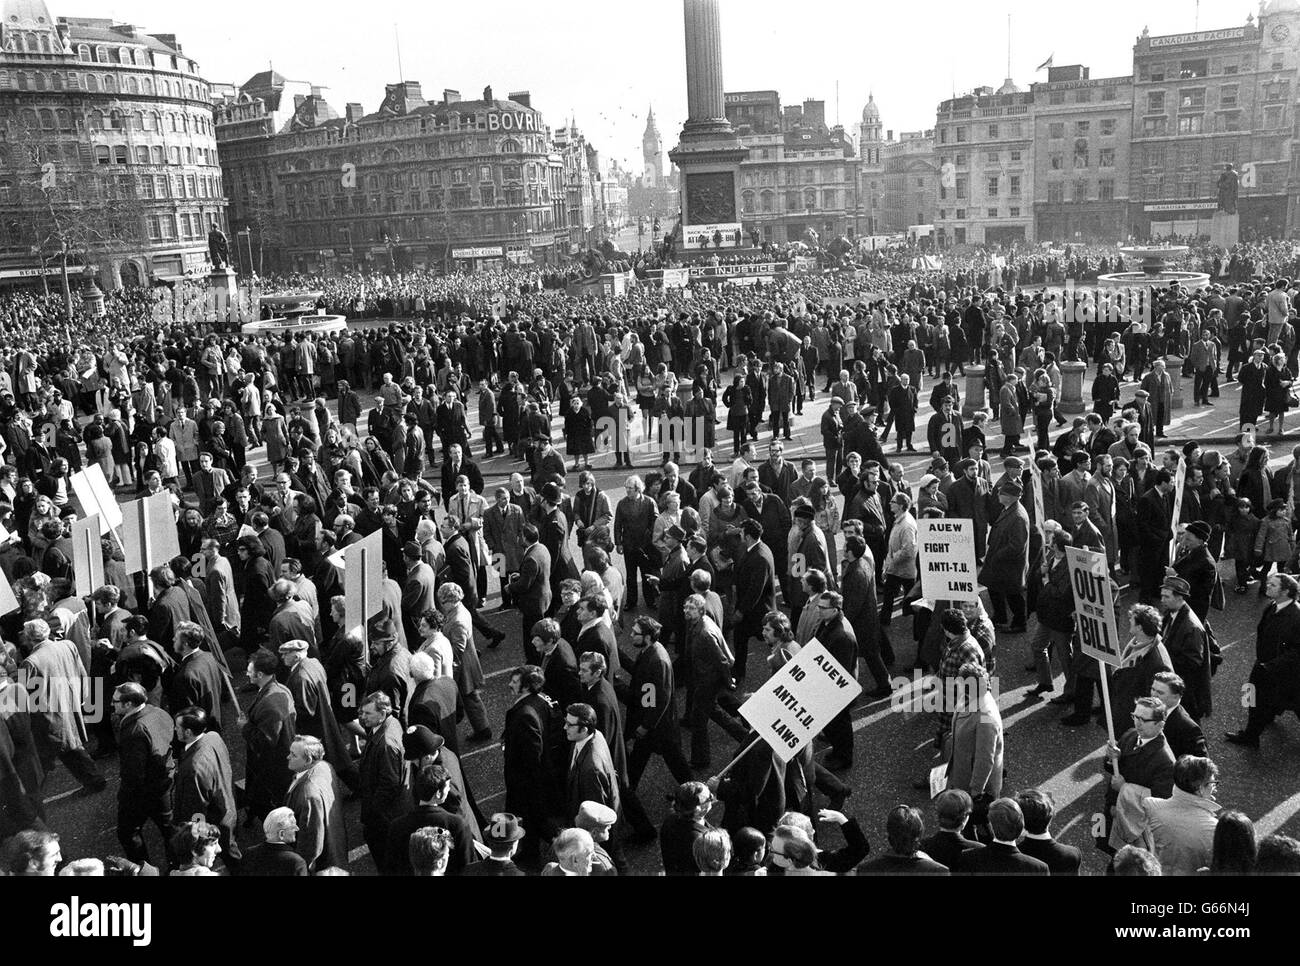 Almost every square foot was covered in Trafalgar Square in a mammoth but peaceful rally against the Government's Industrial Relations Bill. Stock Photo